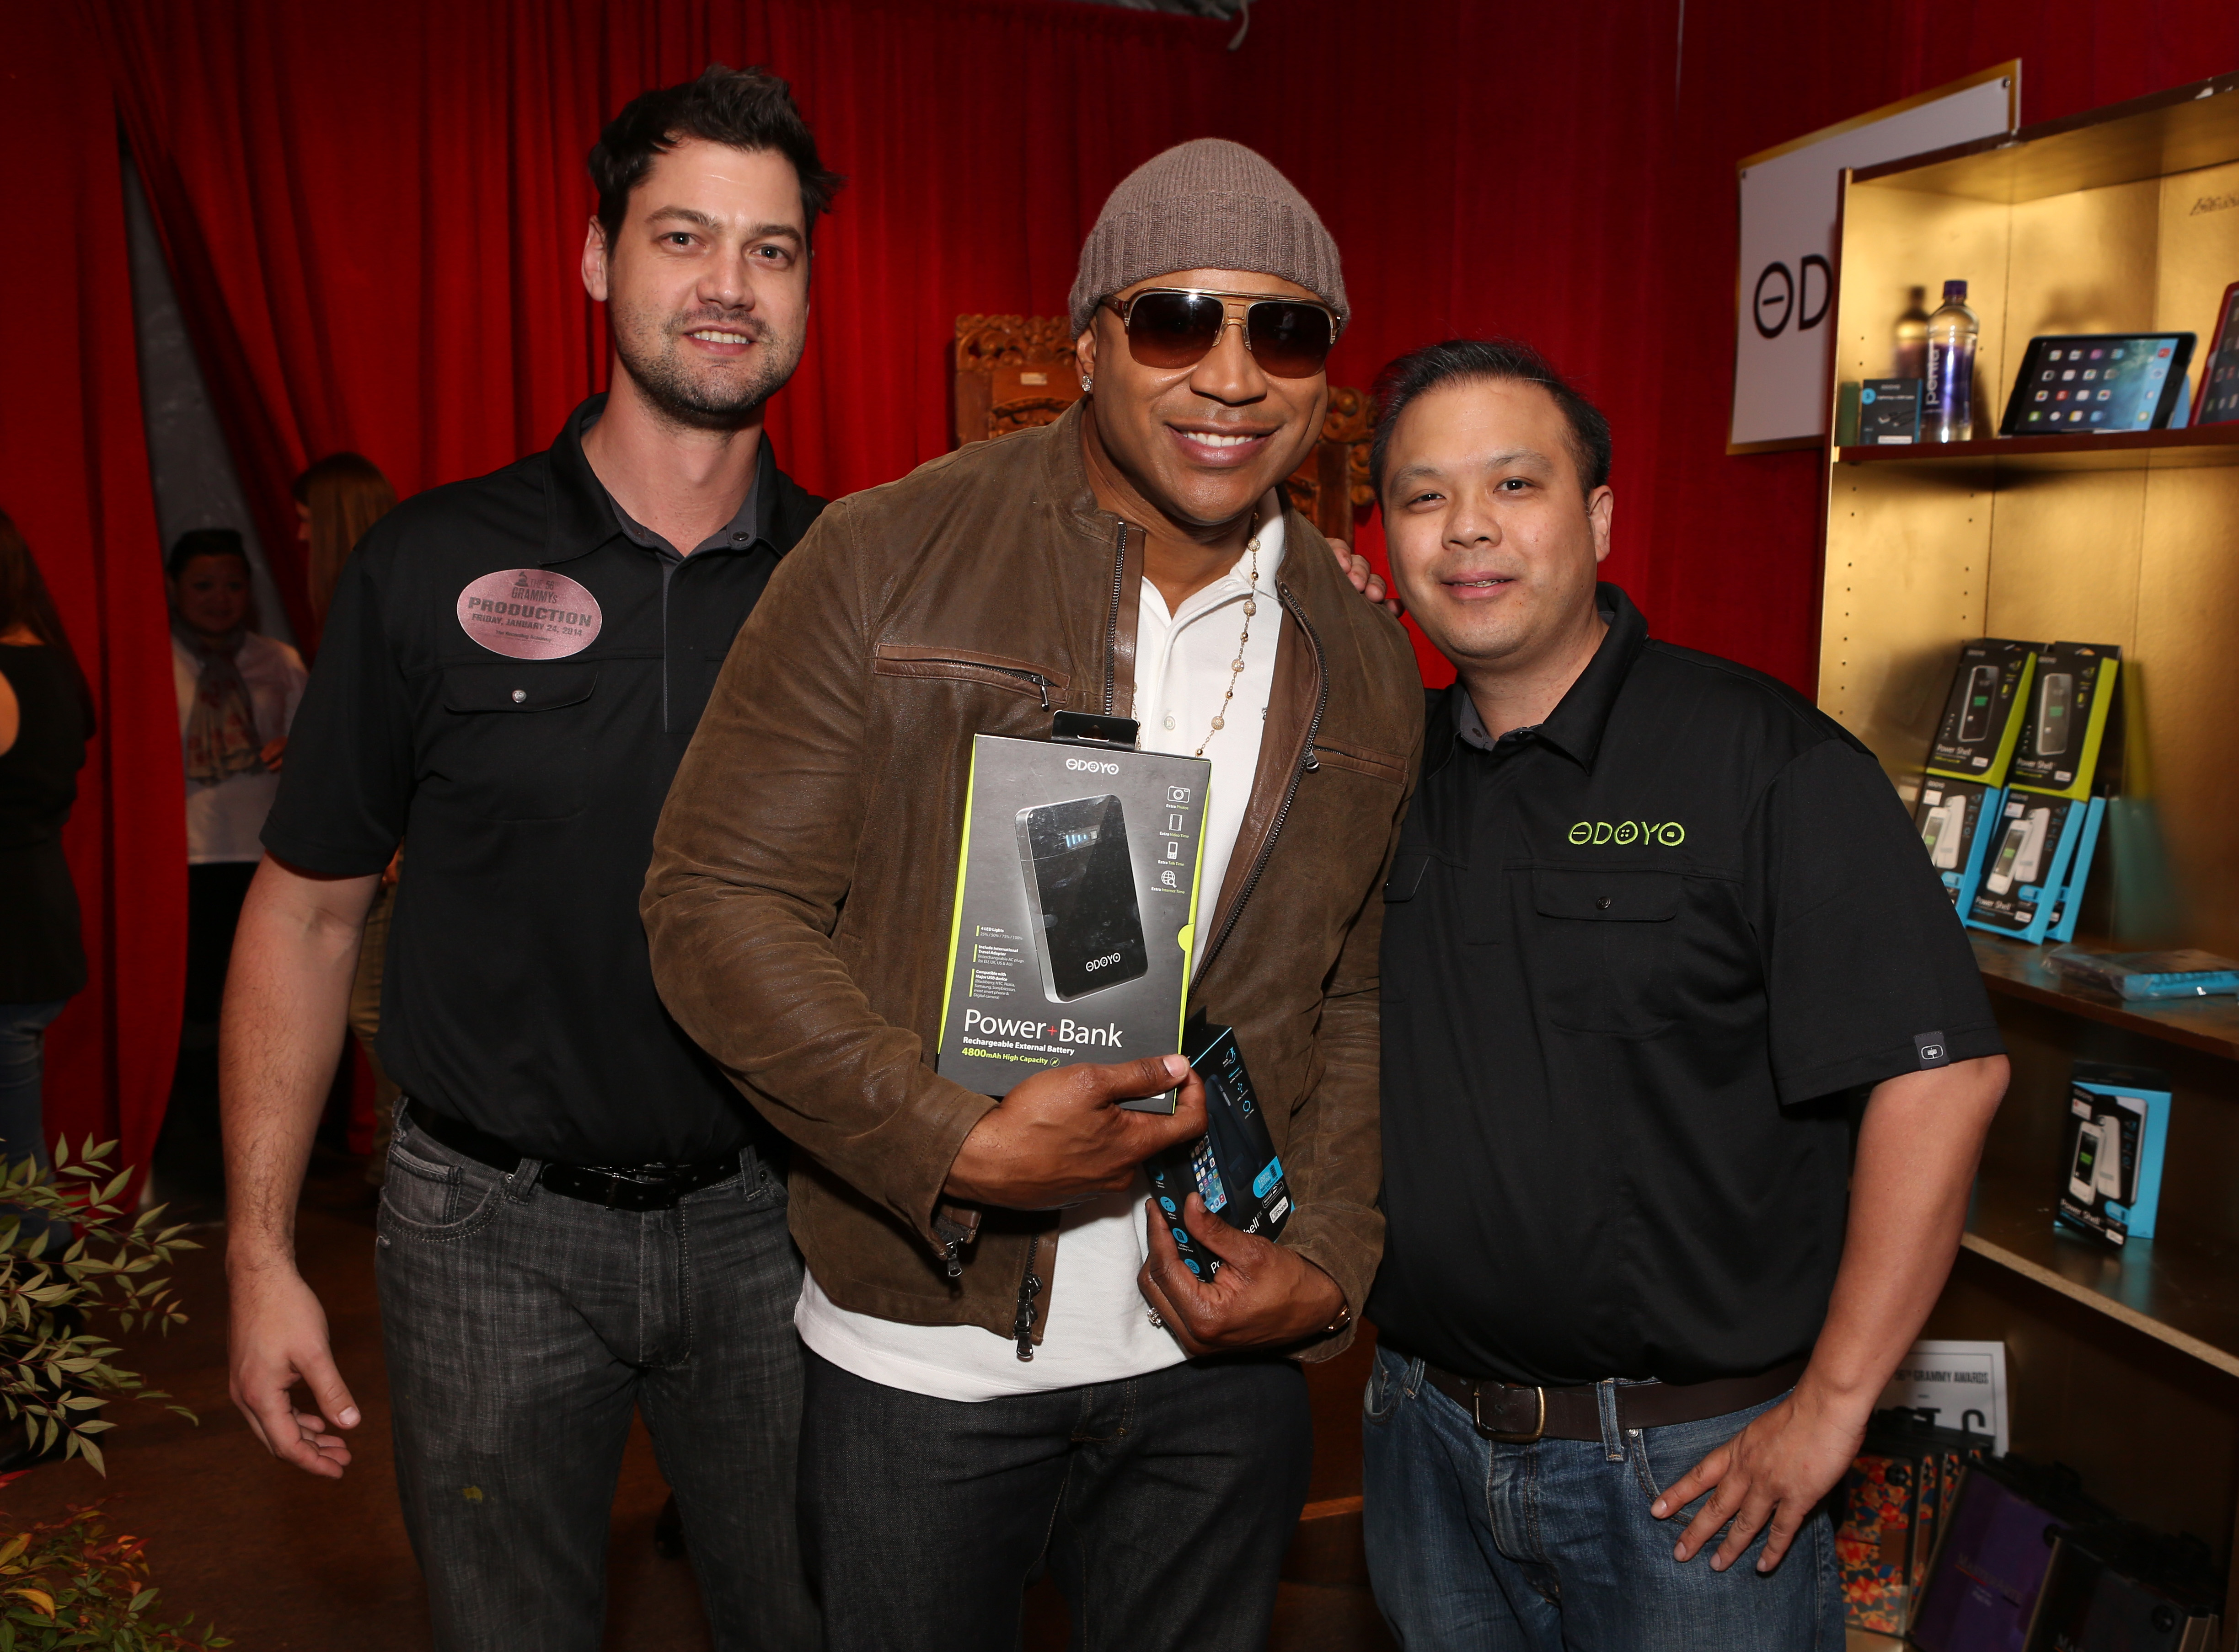 Recording artist LL Cool J attends the GRAMMY Gift Lounge during the 56th Grammy Awards at Staples Center on January 24, 2014 in Los Angeles, California.  (Photo by Alison Buck/WireImage)